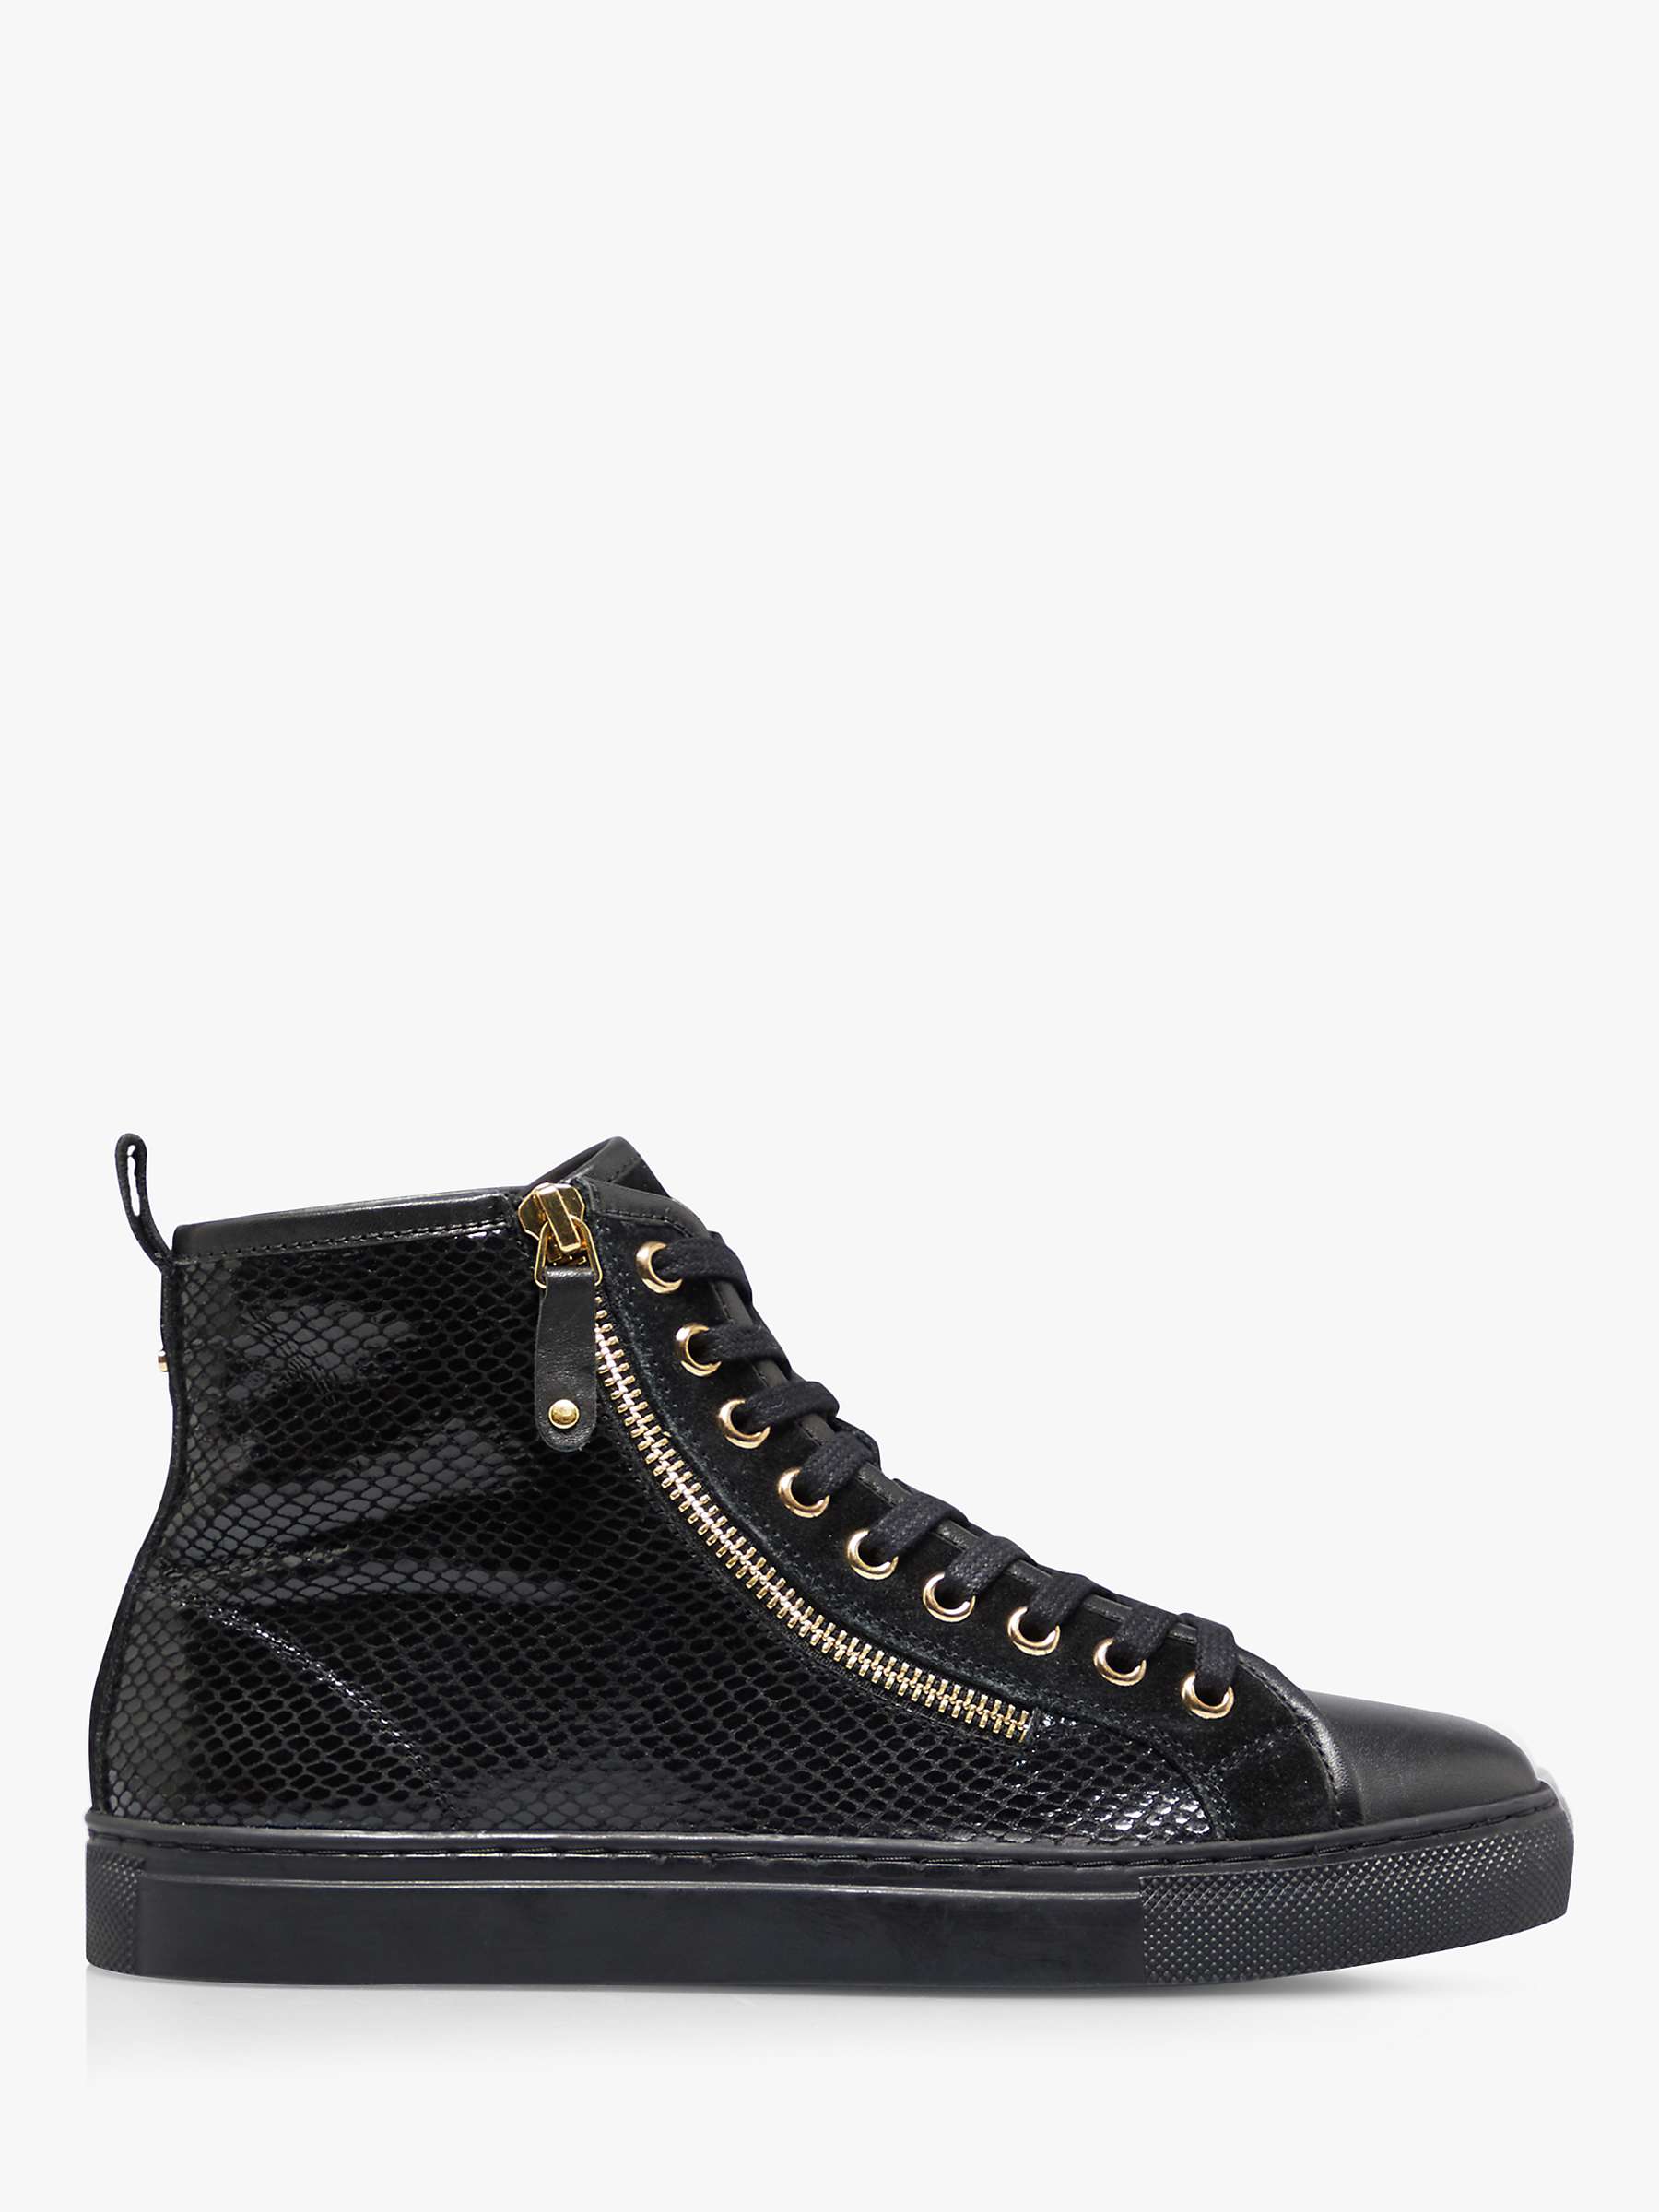 Buy Dune Elfred Leather Side Zip High Top Trainers Online at johnlewis.com